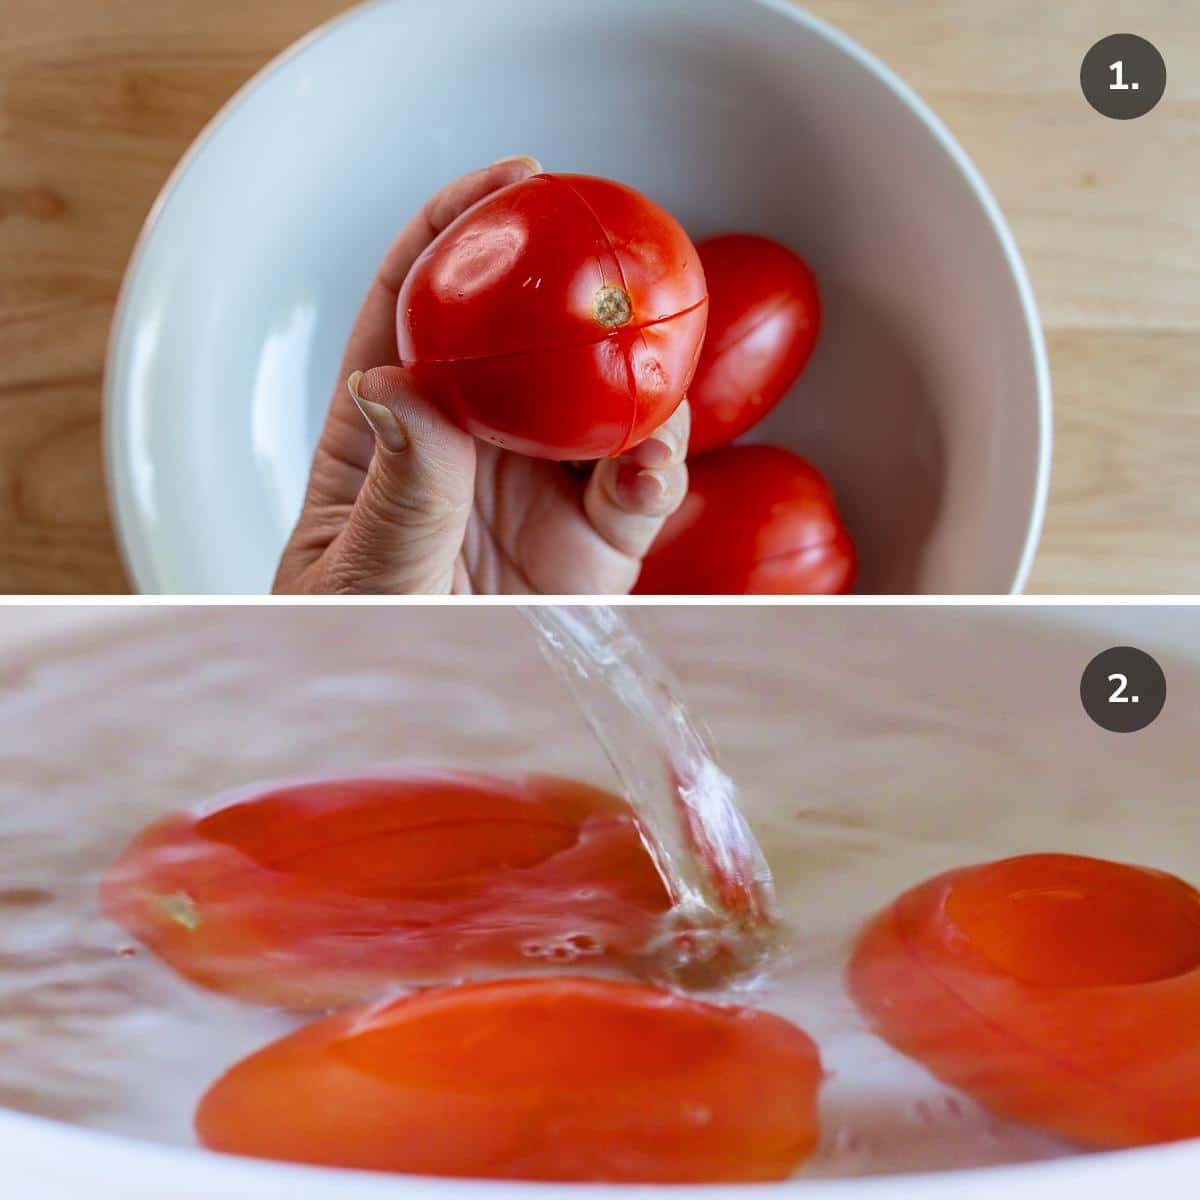 Making a slit in tomatoes and pouring over hot water.